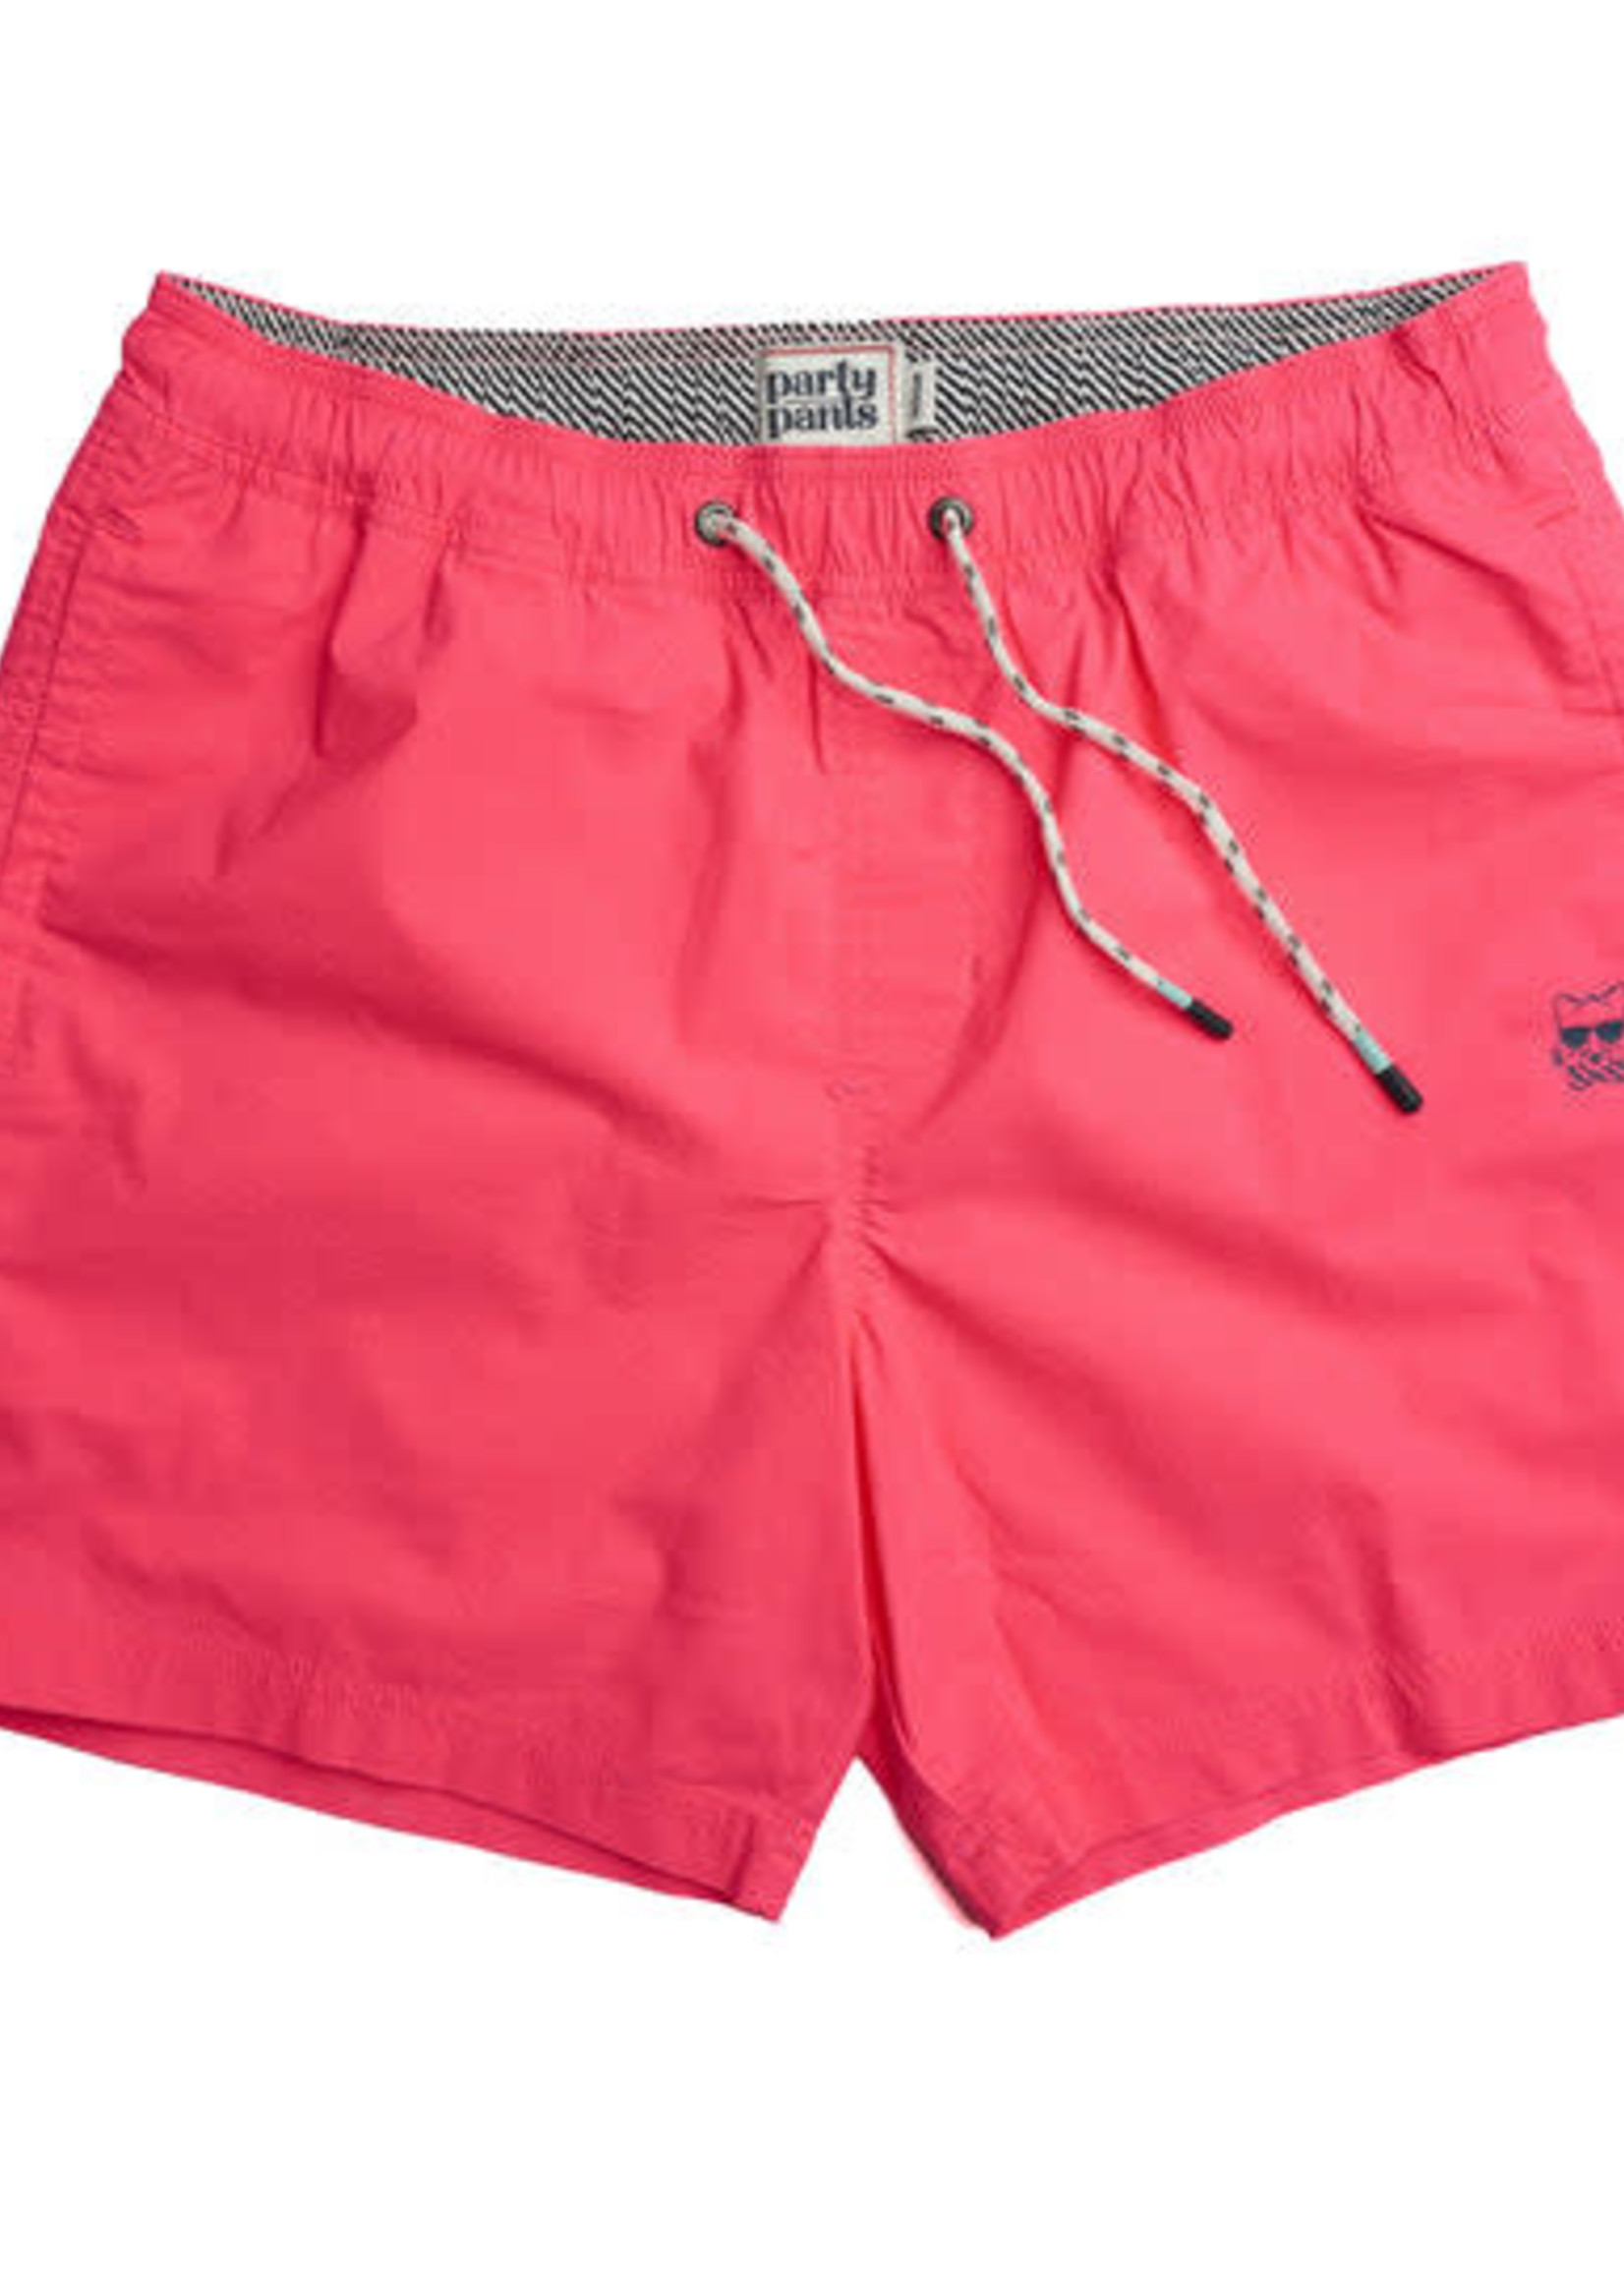 Party Pants Solids Shorts Pink